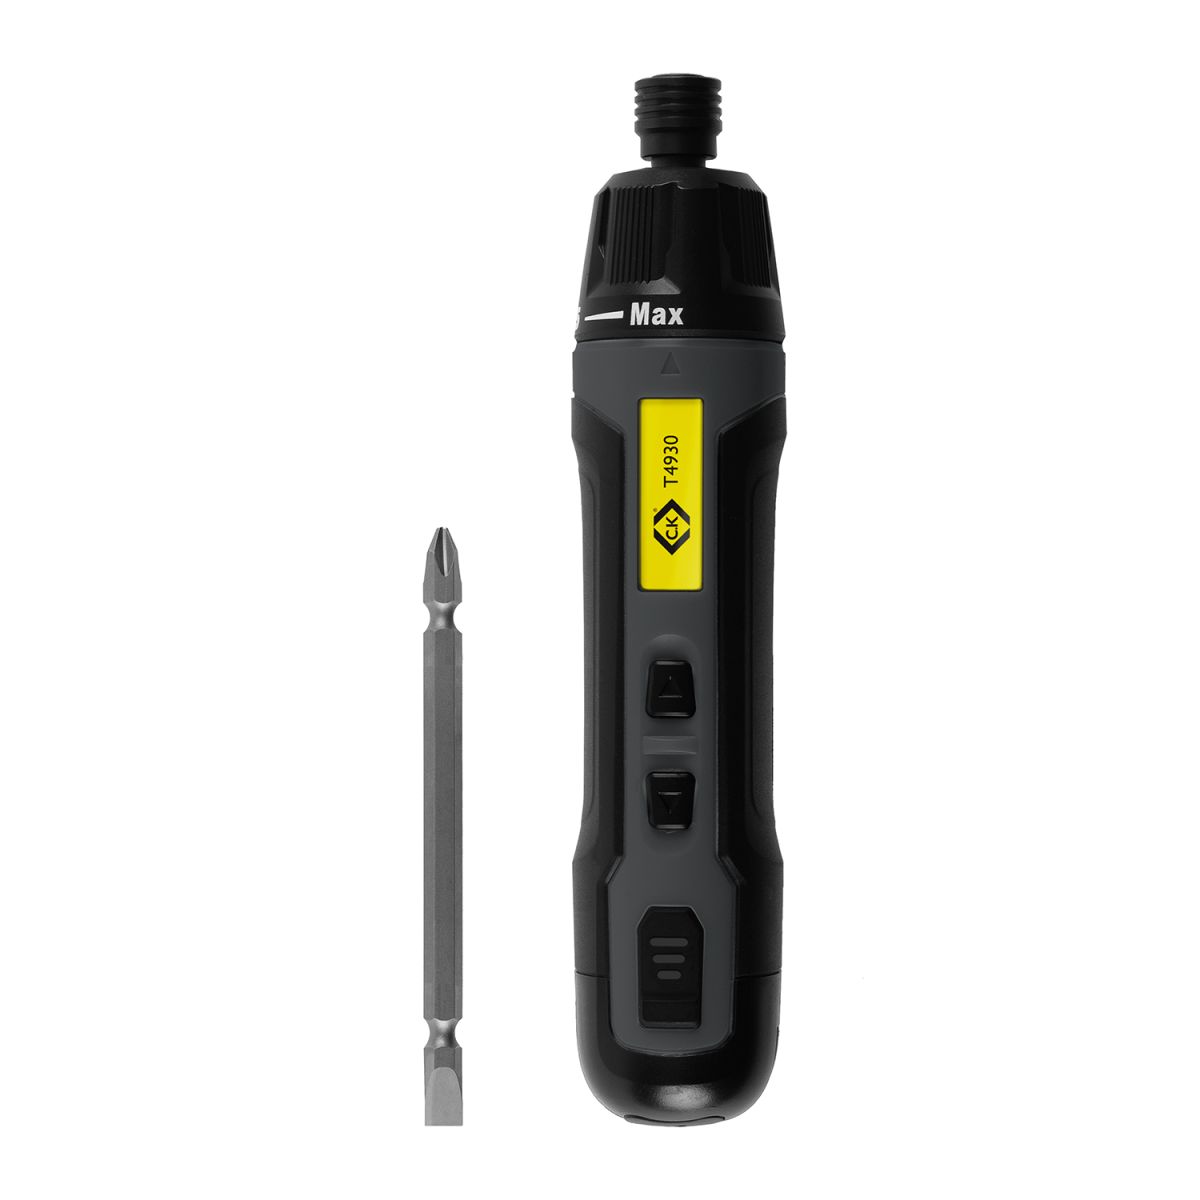 Power your projects with C.K Tools latest launch; the E-Driver Electric Screwdriver